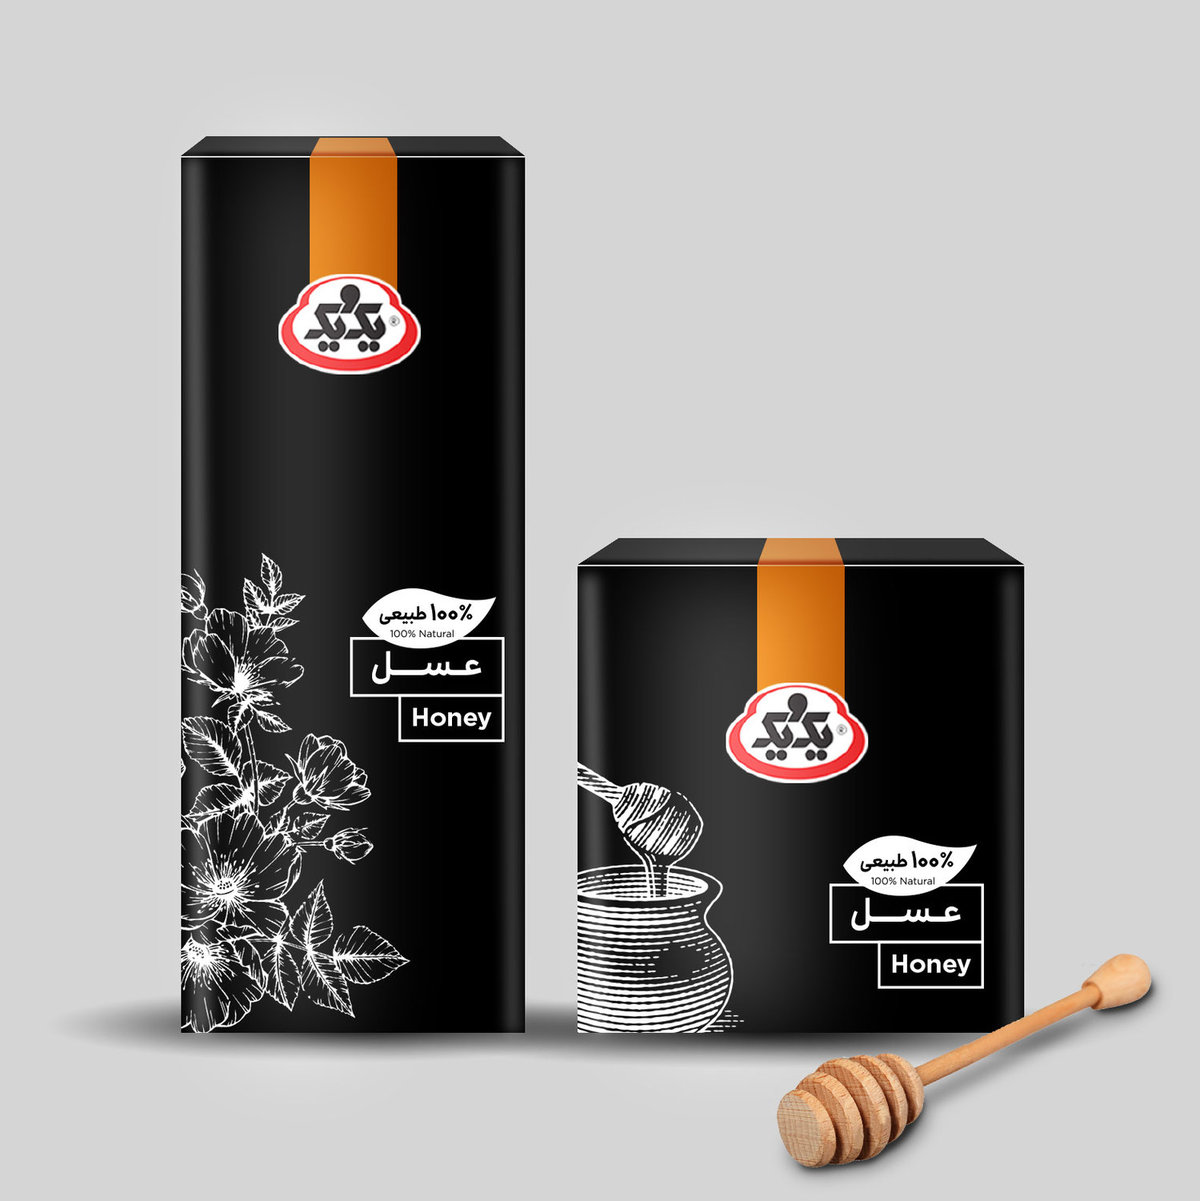 Packaging Design for 1 & 1 Food Products - World Brand Design Society